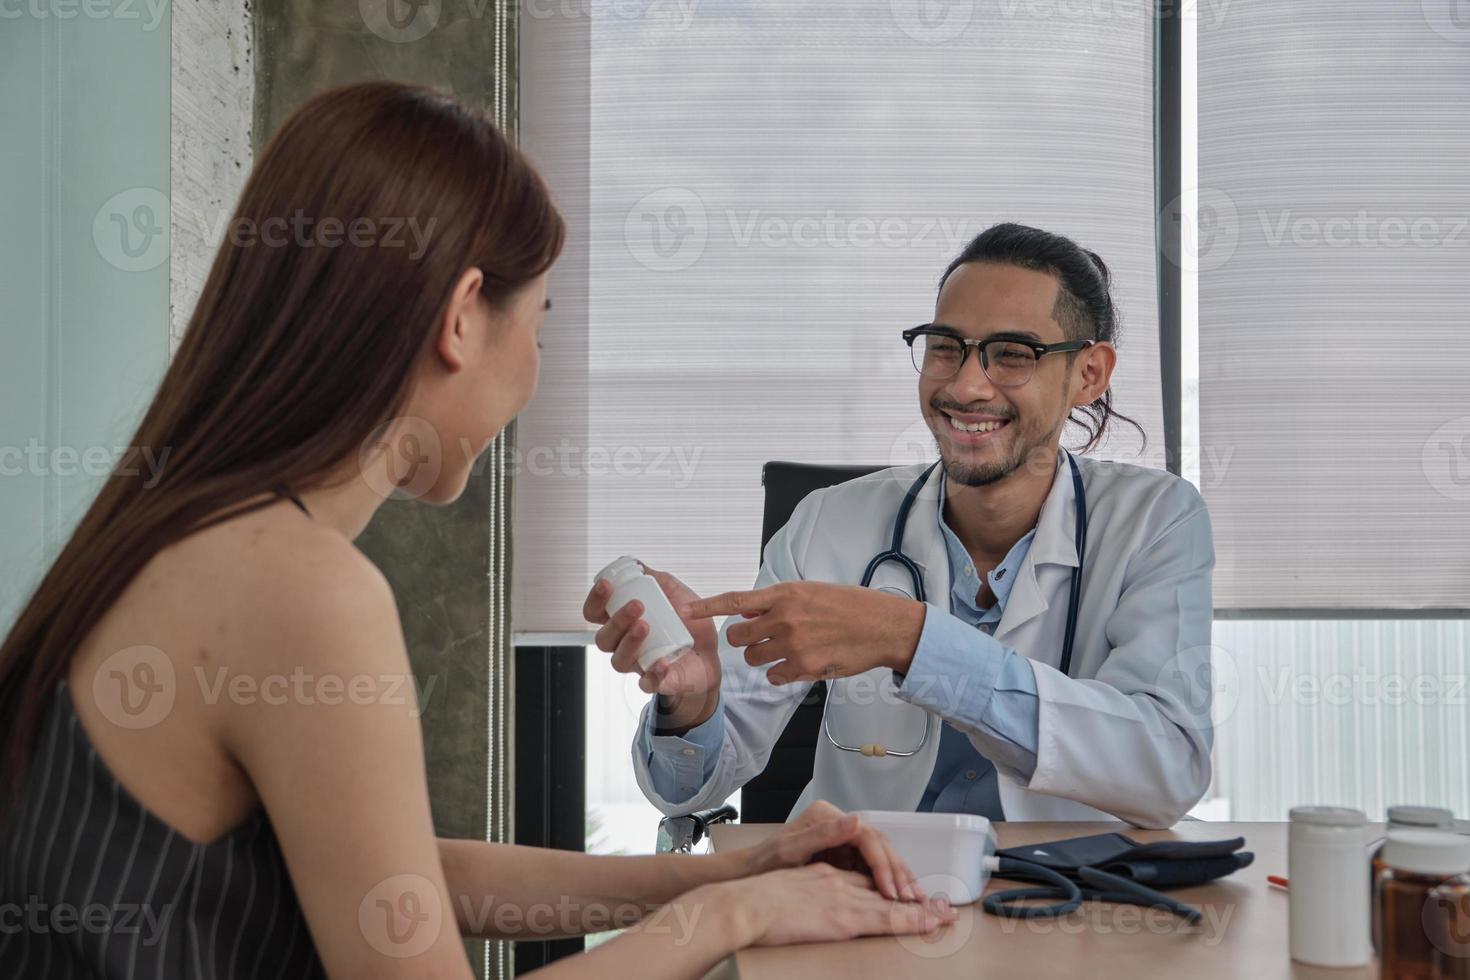 Medical treatment and check-up, young male doctor talks with a smile and examination a female patient of Asian ethnicity during a health consultation appointment visit, advise in a hospital clinic. photo